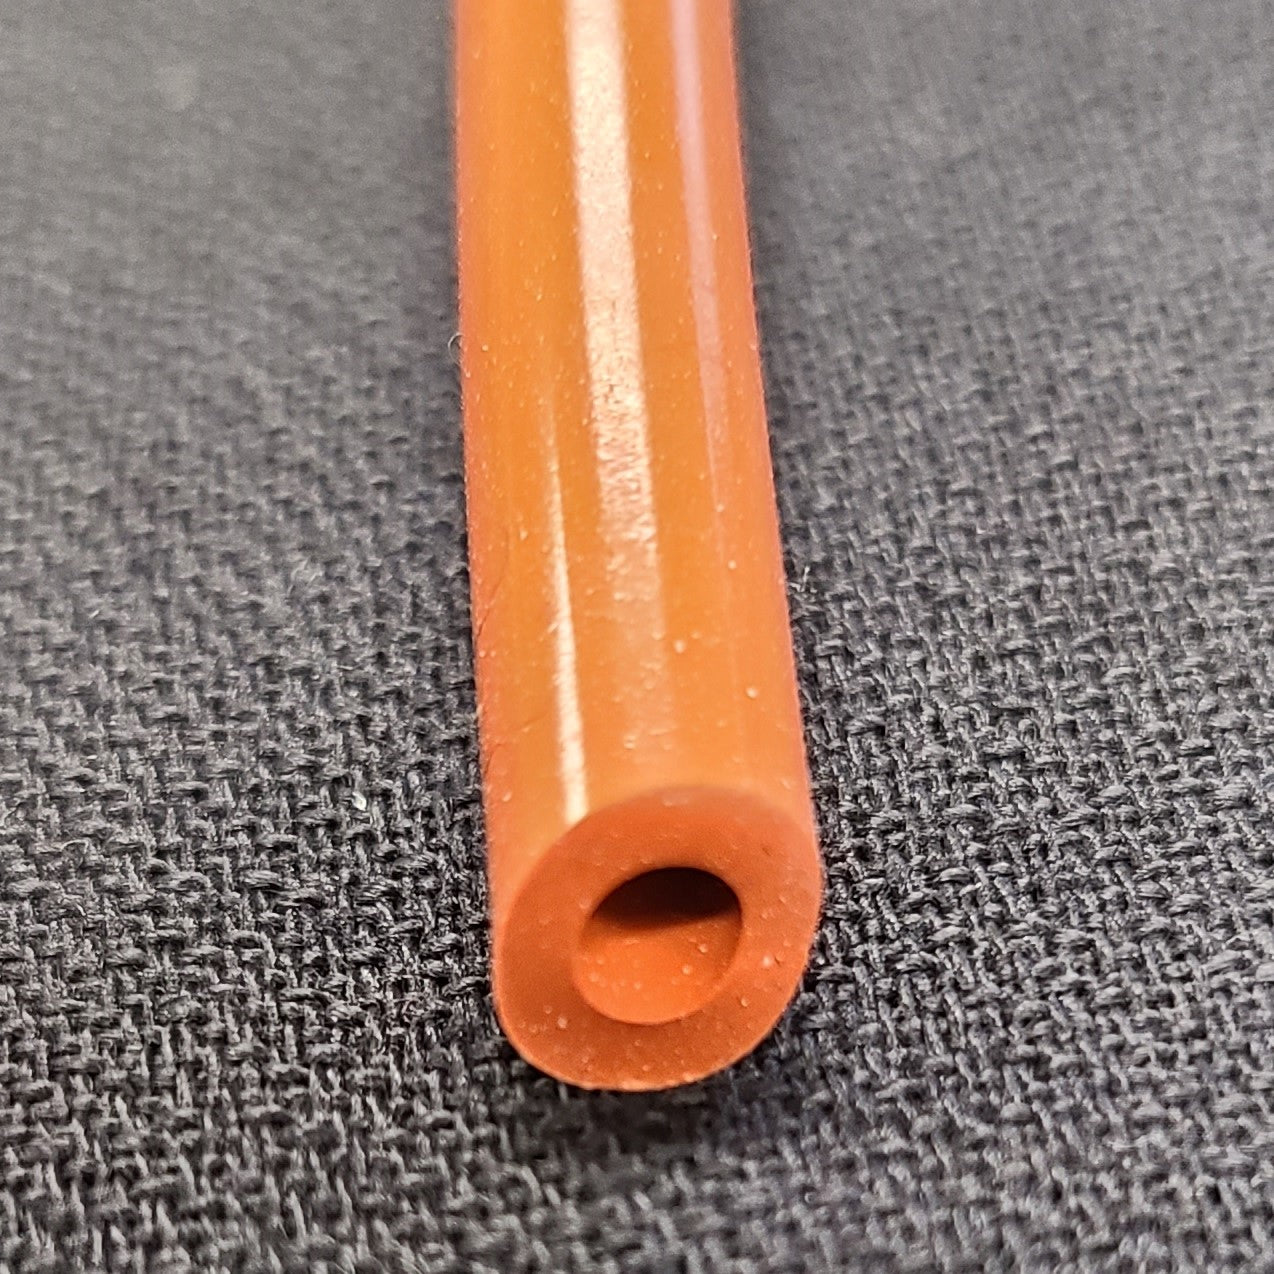 Blood Supply Line - 1/8" Inside Diameter Silicone Tubing -10 foot length